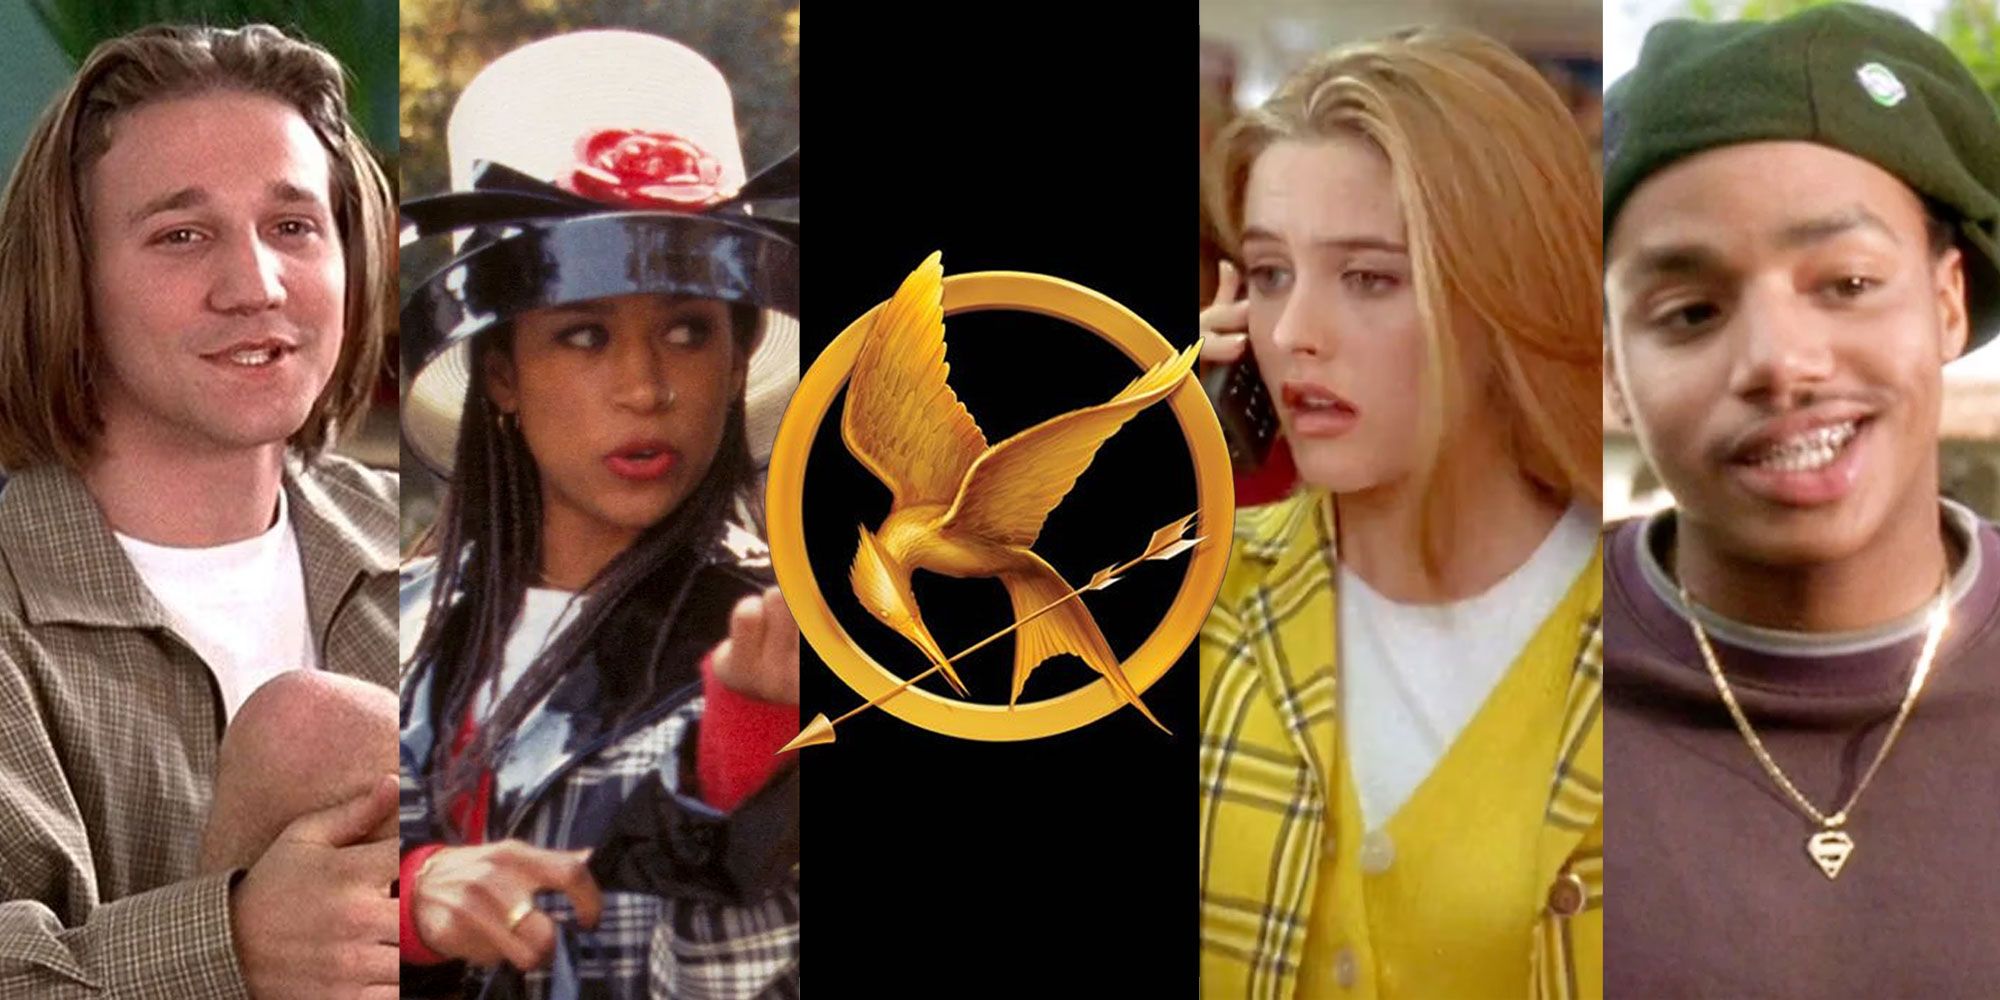 A split image features Travis, Dionne, Cher, and Murray from clueless with the picture of the mockingjay pin from The Hunger Games in the middle